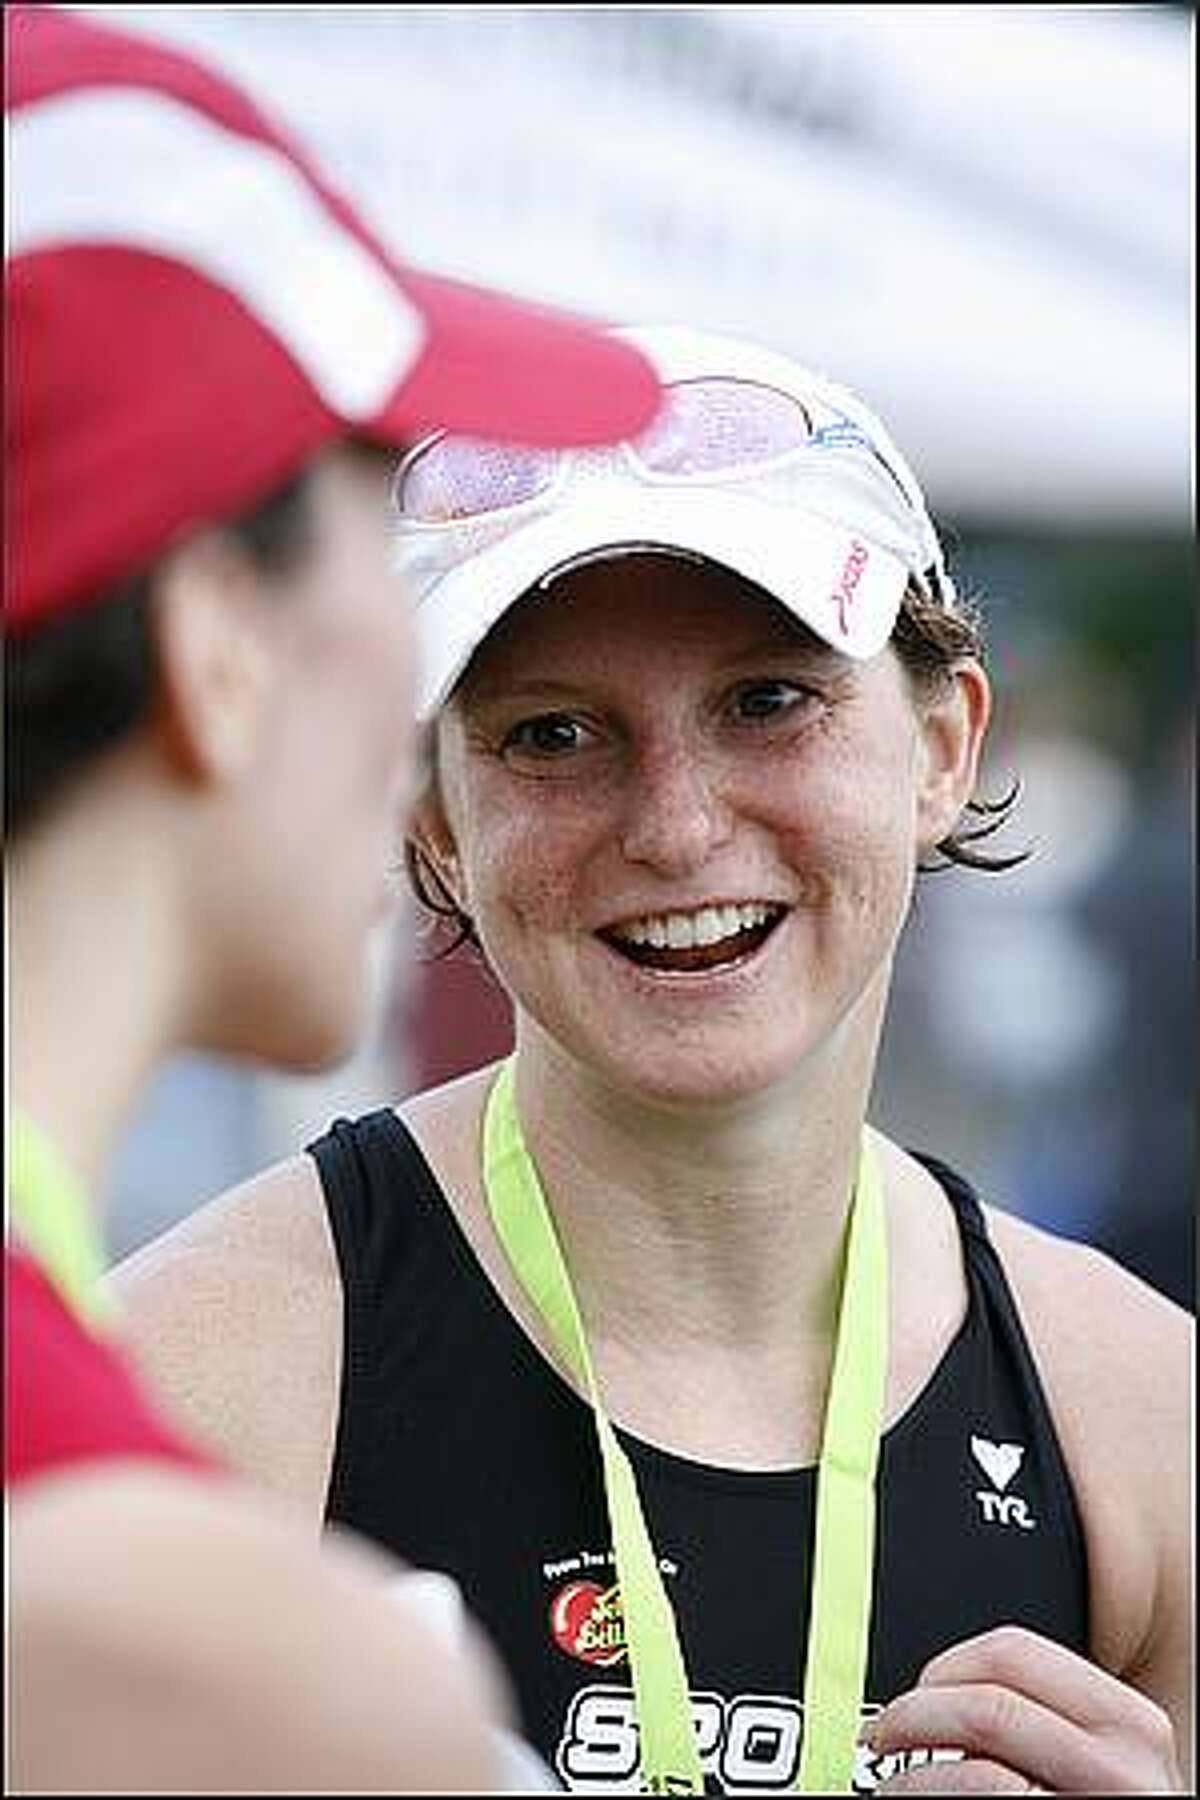 Erin Ford of The Dalles, Oregon won the 2008 Danskin Triathlon, her first time competing in the annual event.